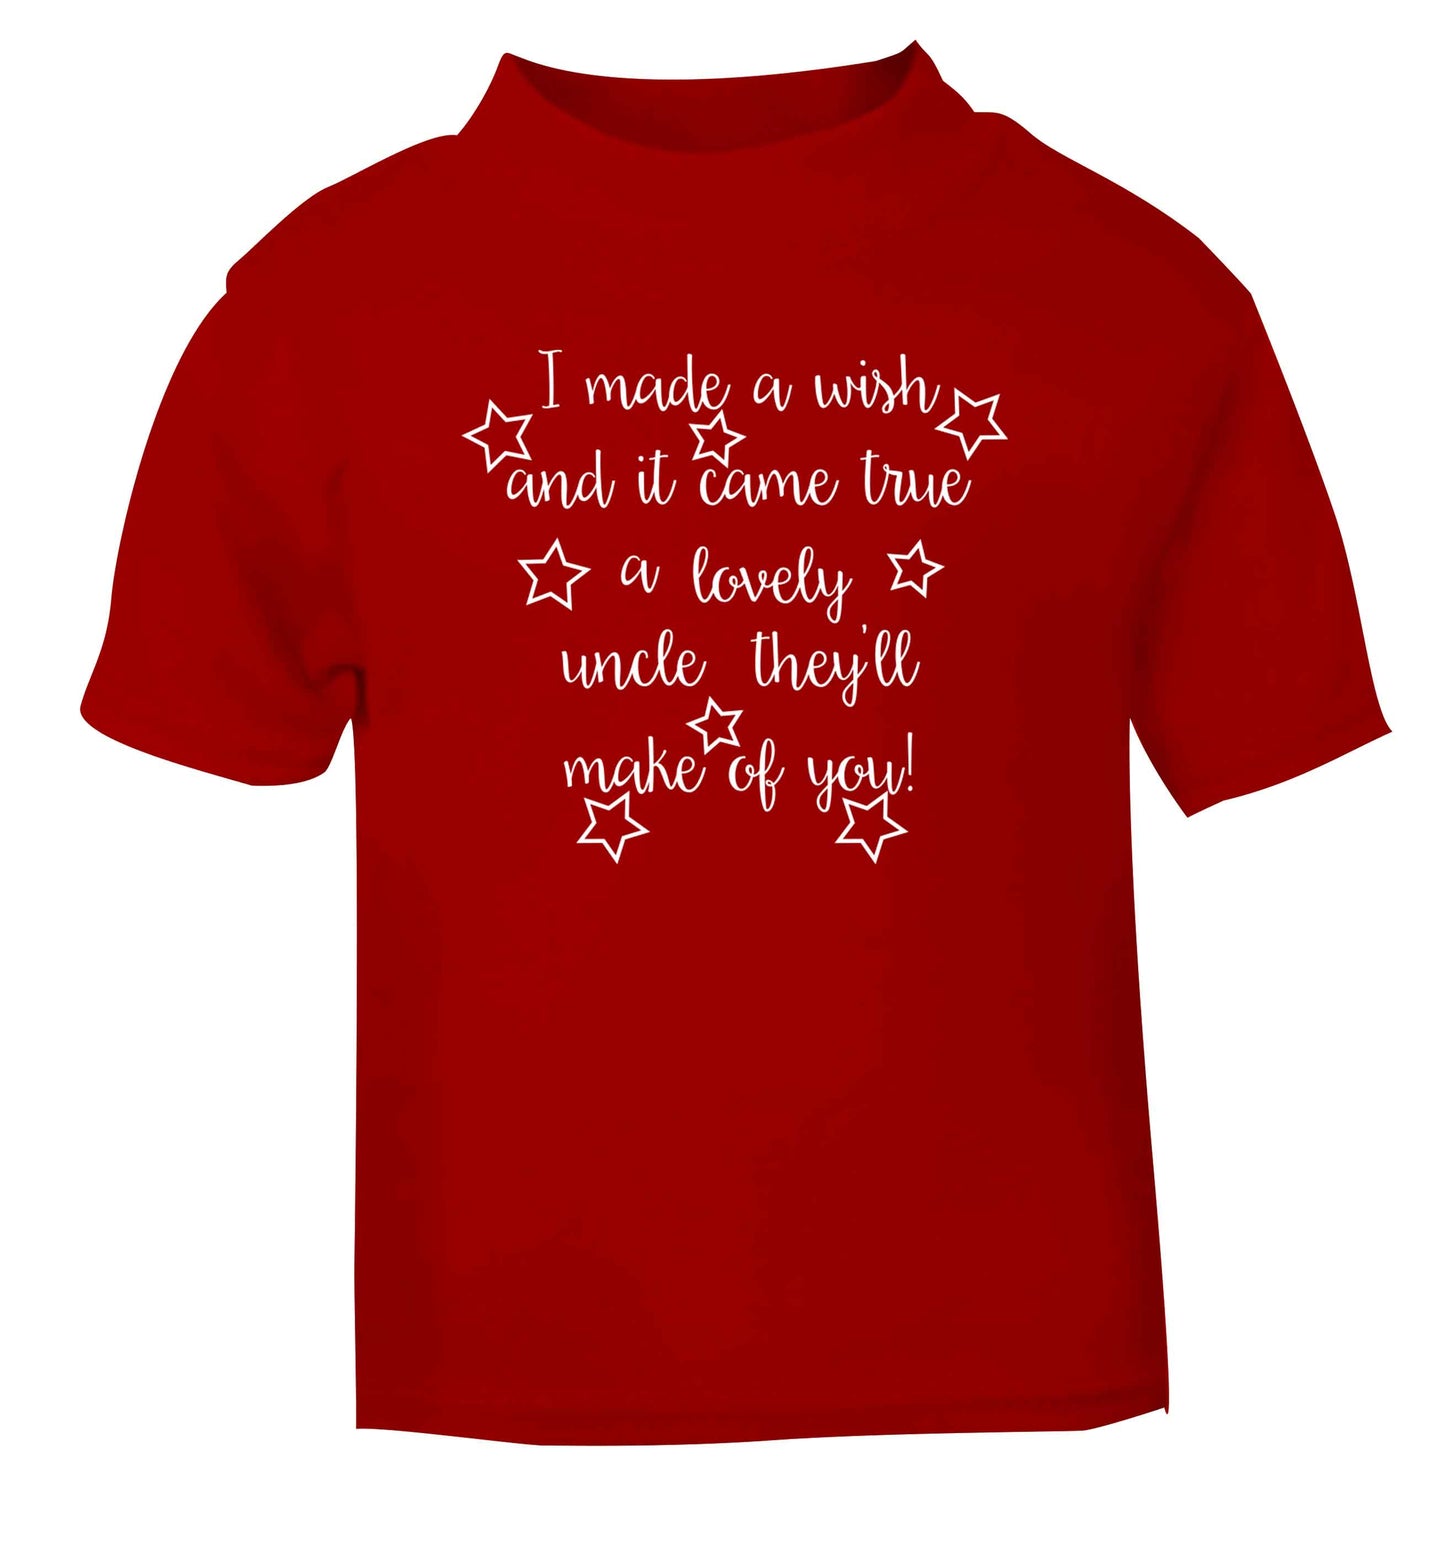 I made a wish and it came true a lovely uncle they'll make of you! red Baby Toddler Tshirt 2 Years